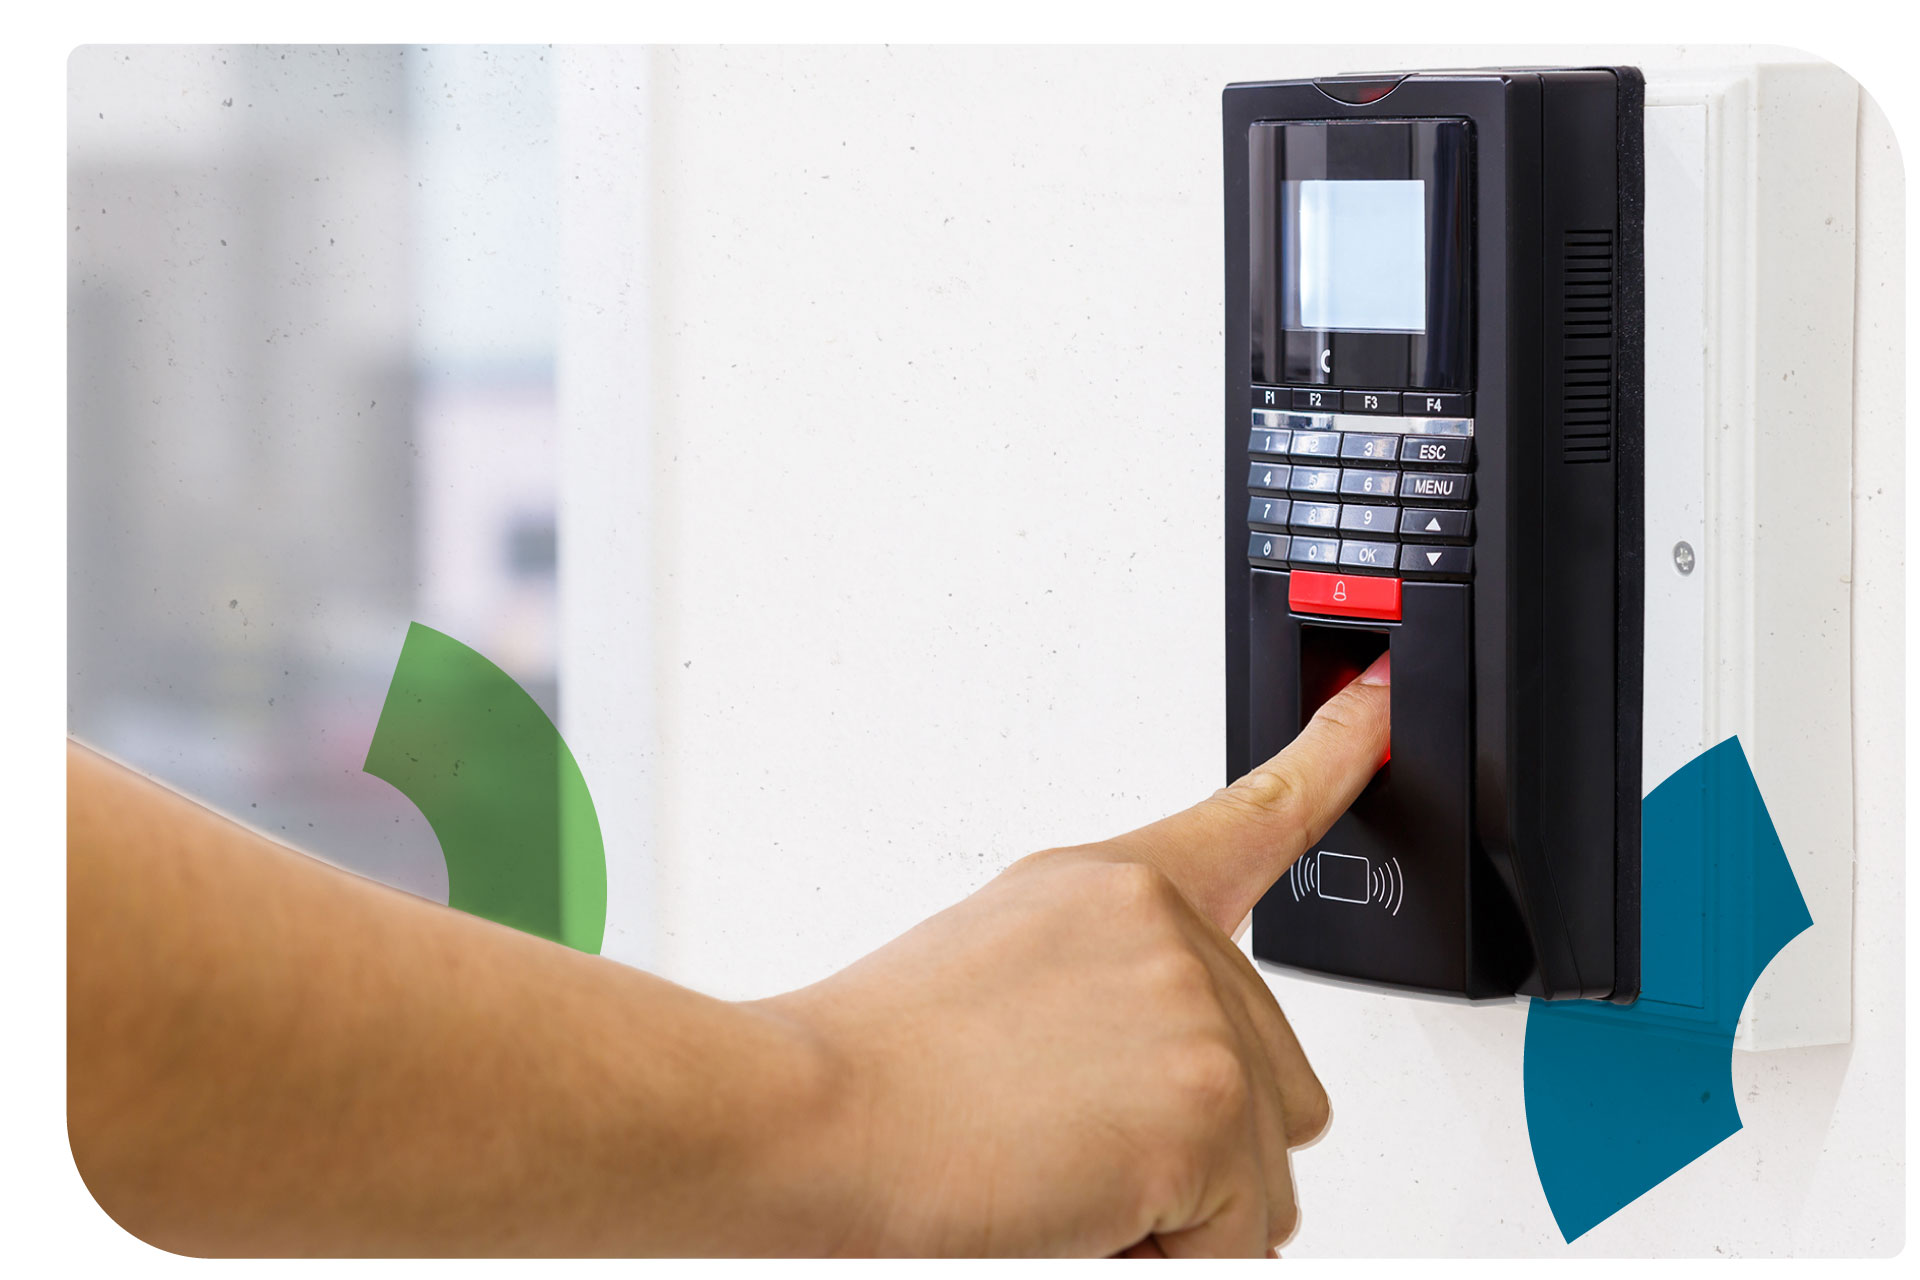 A finger scanner to scan fingerprints for access or to gain entry into a building